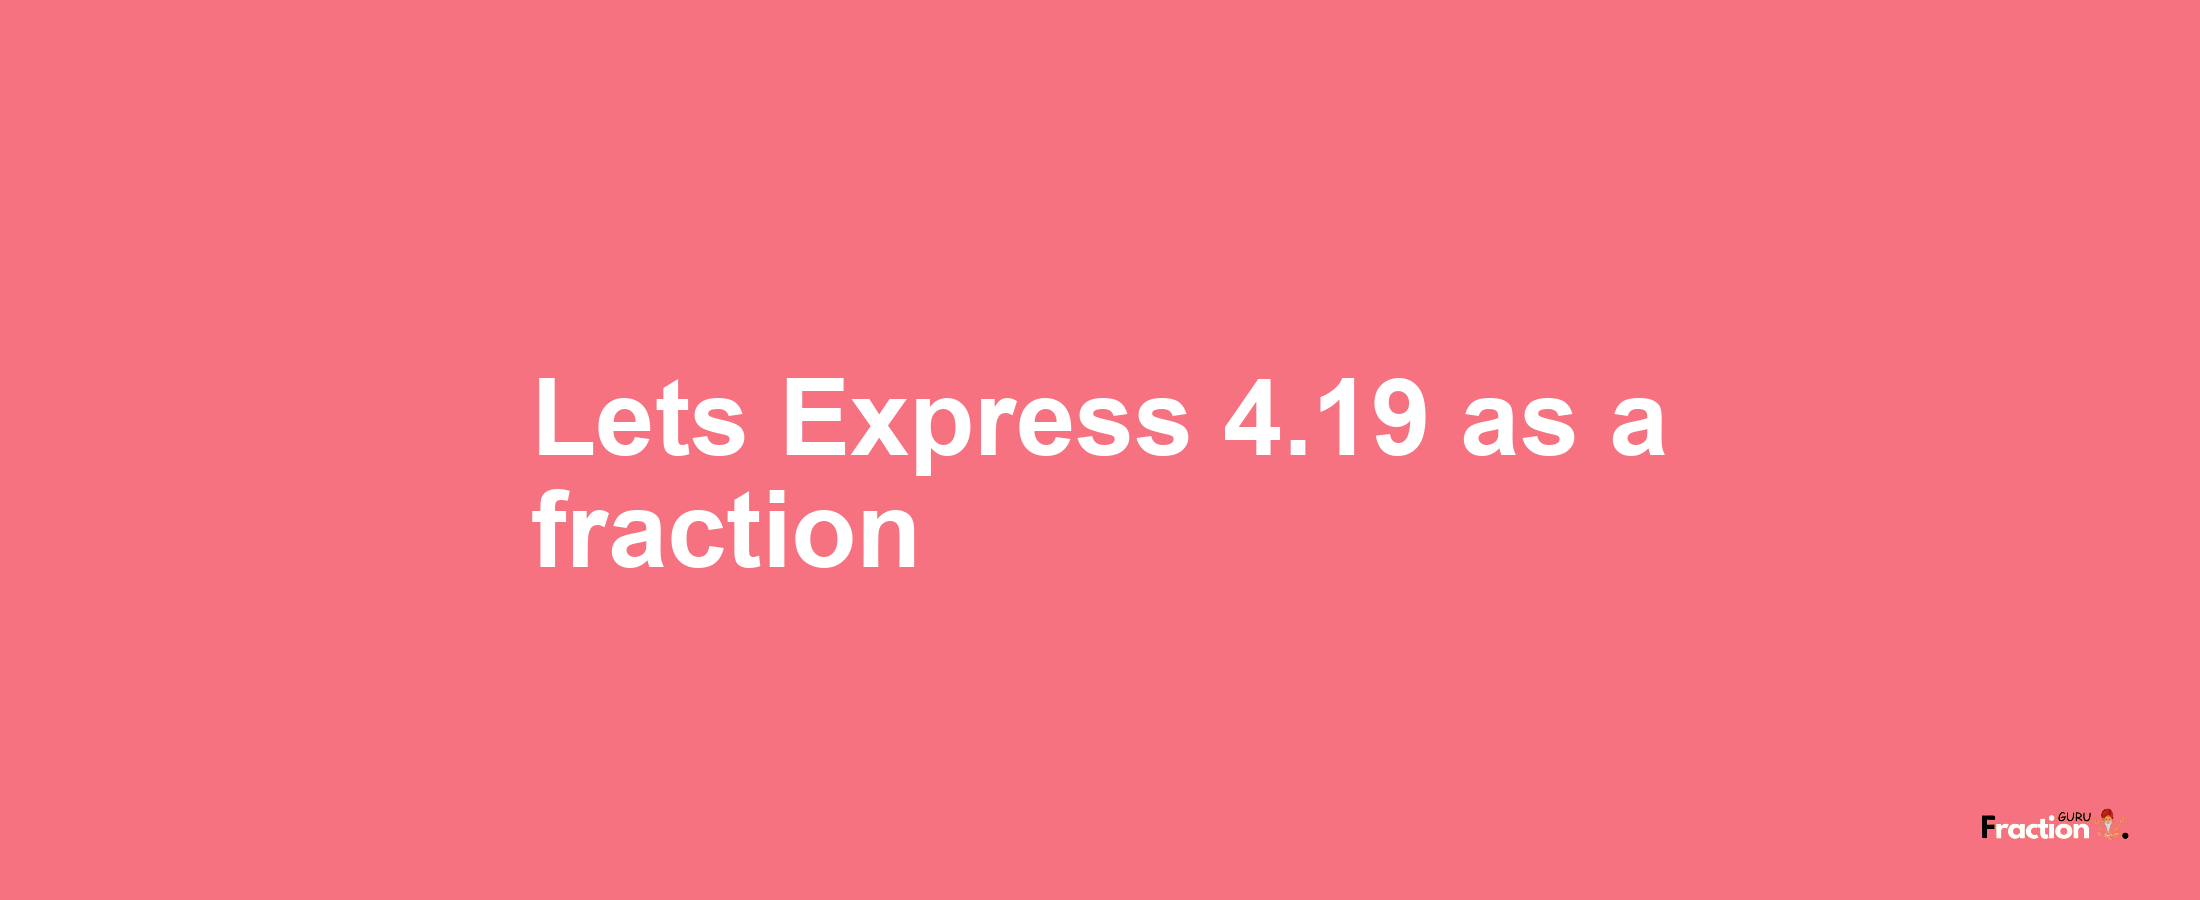 Lets Express 4.19 as afraction